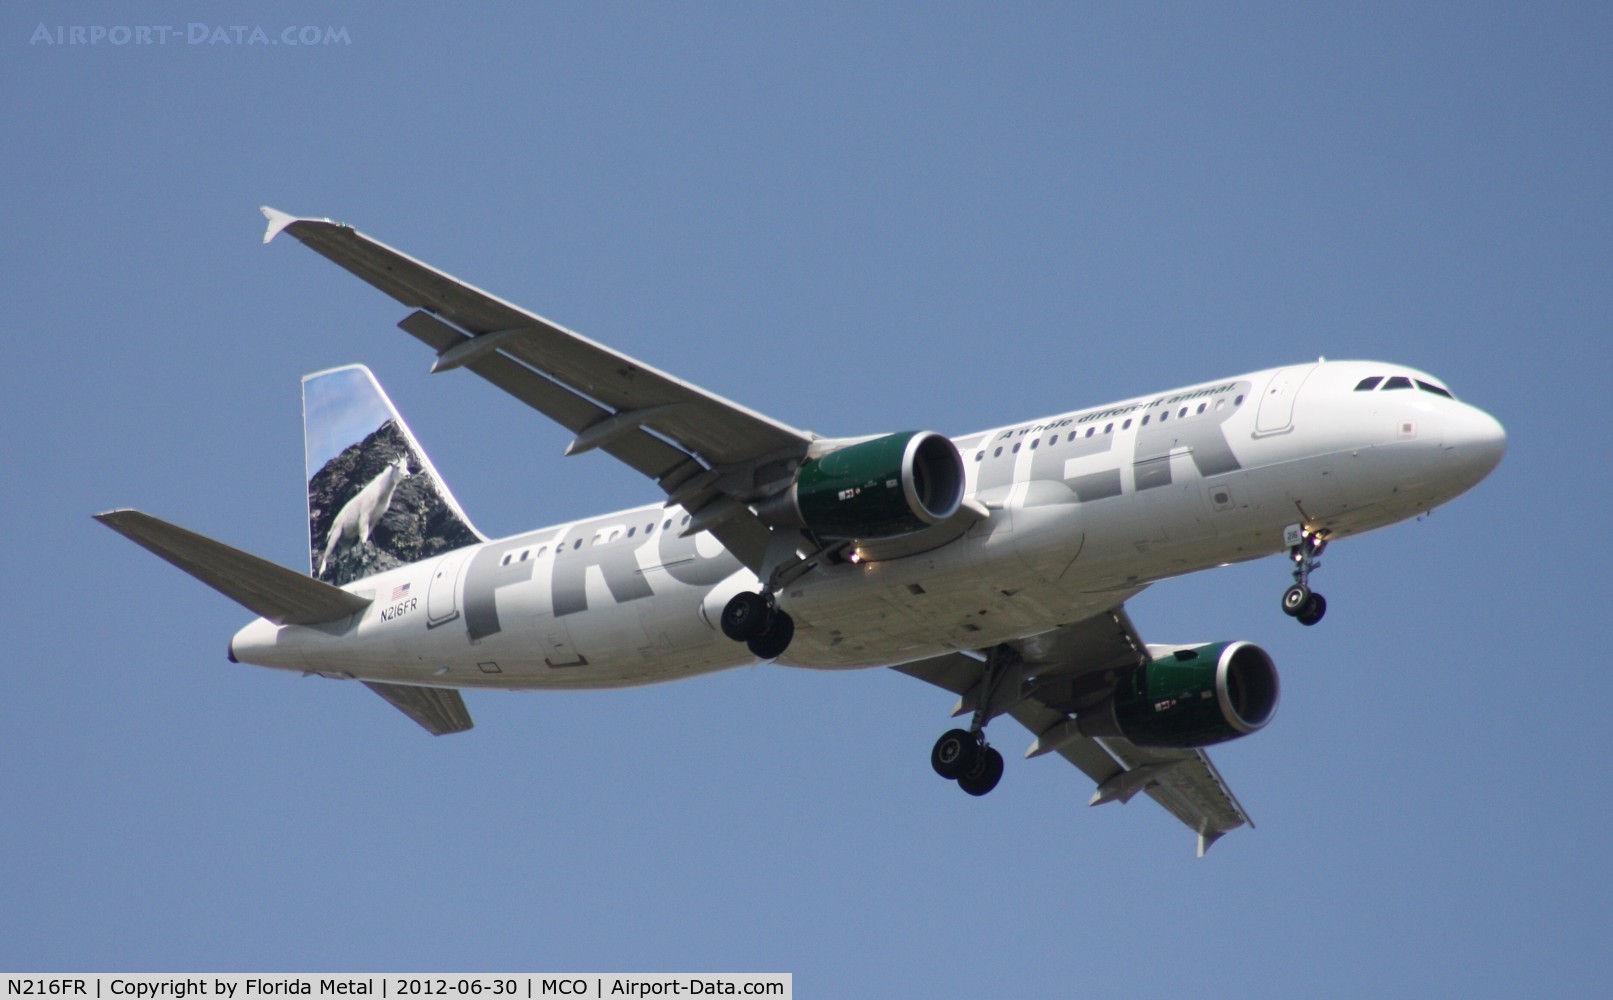 N216FR, 2011 Airbus A320-214 C/N 4745, Cliff the Mountain Goat Frontier A320